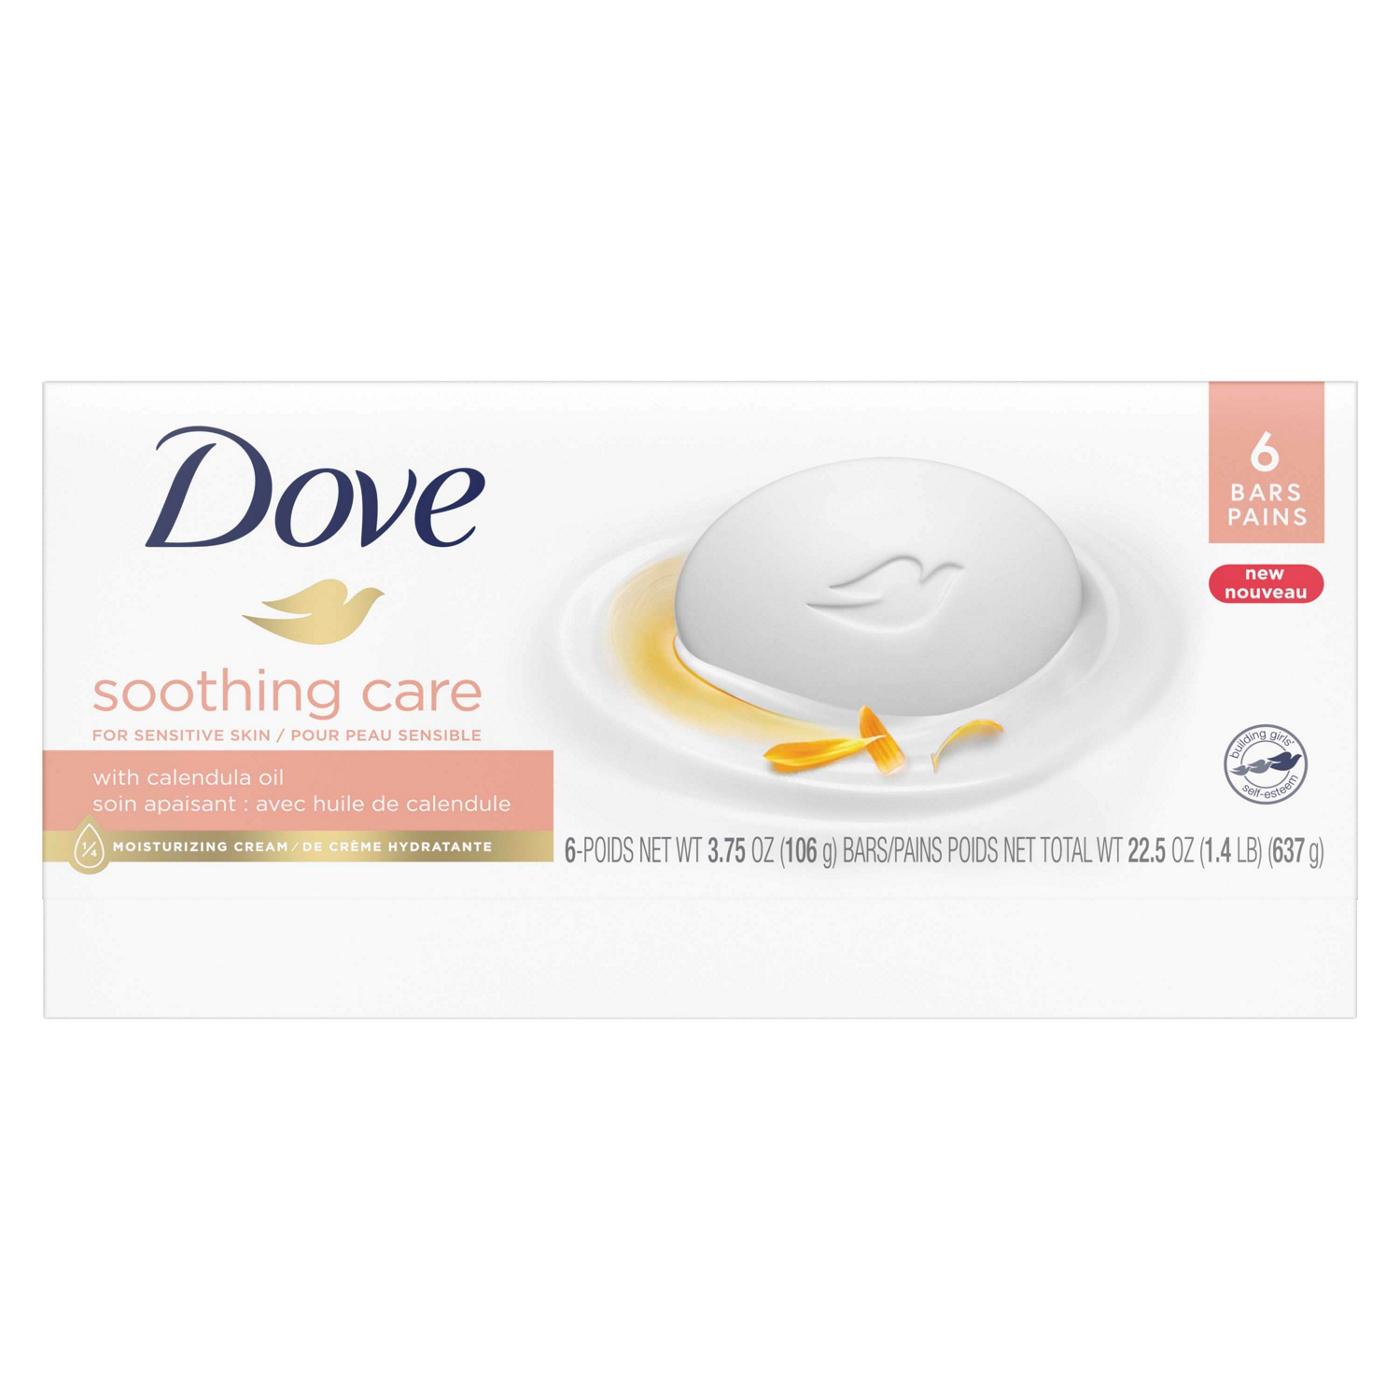 Dove Soothing Care with Calendula Oil Moisturizing Beauty Bars; image 2 of 3